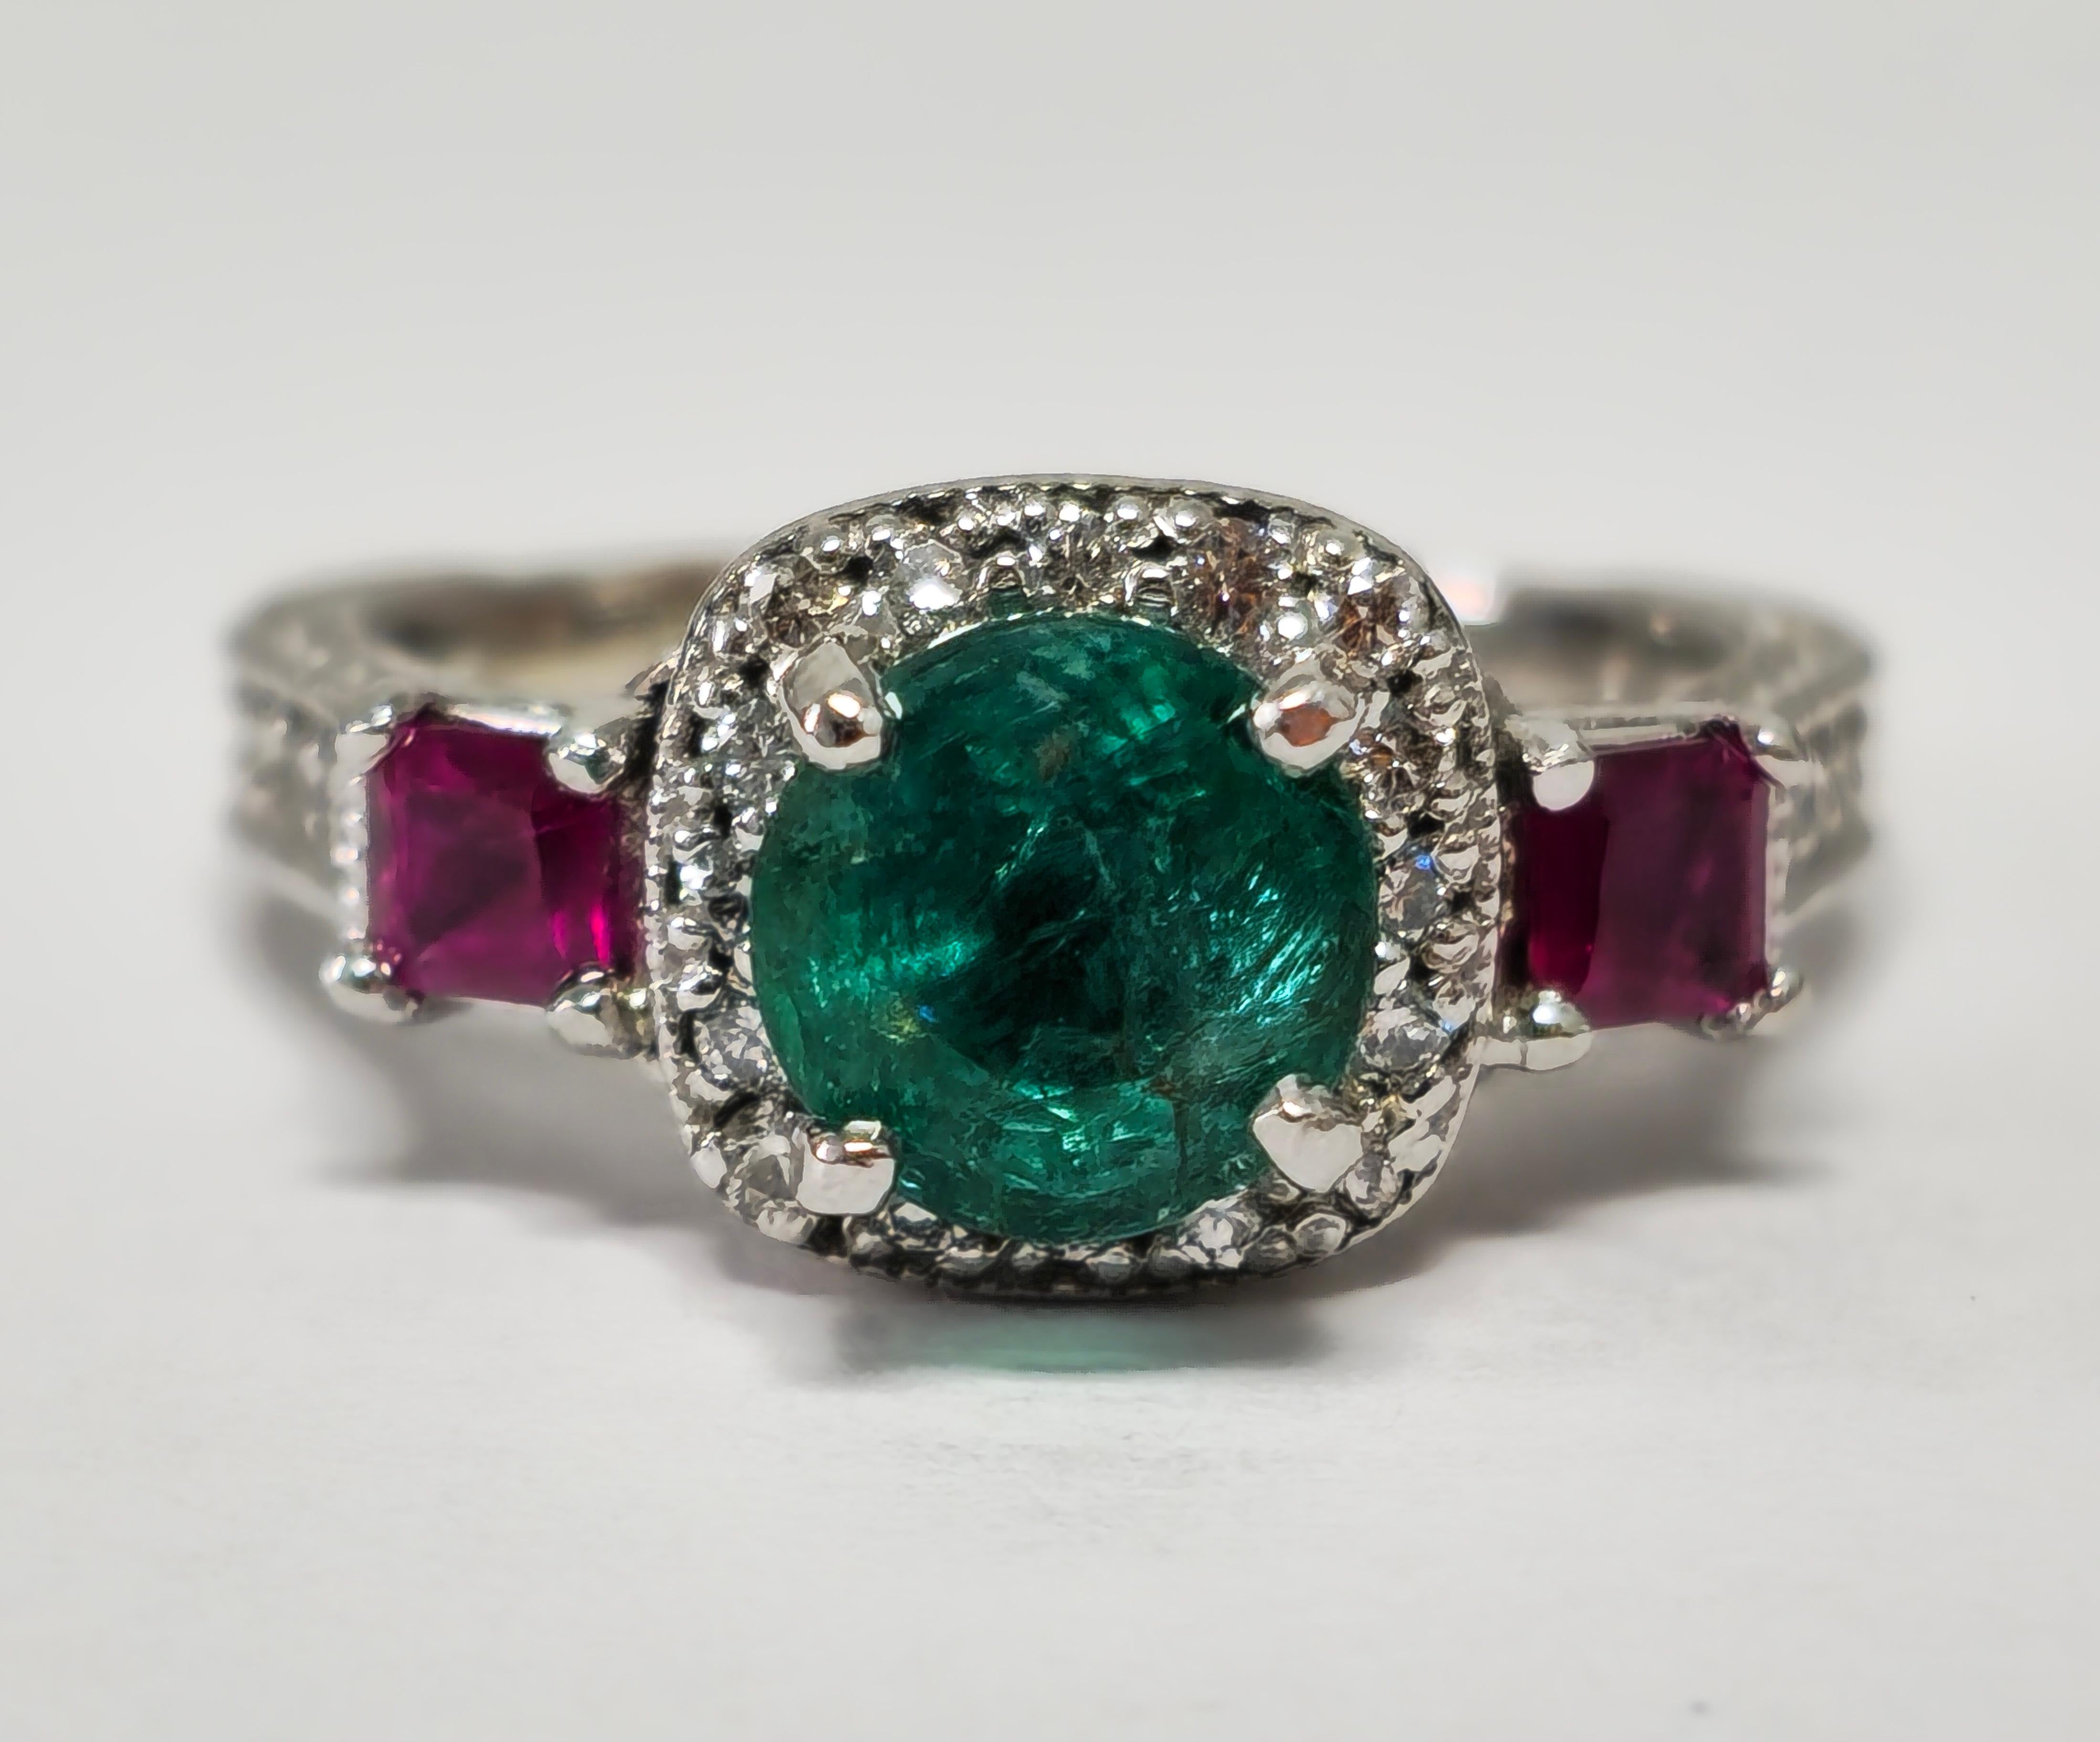 Step into sophistication with our stunning Women's Cocktail Ring, meticulously crafted from luxurious white gold. Adorned with a mesmerizing Colombian emerald and accentuated by princess cut rubies and diamonds, this ring exudes opulence and